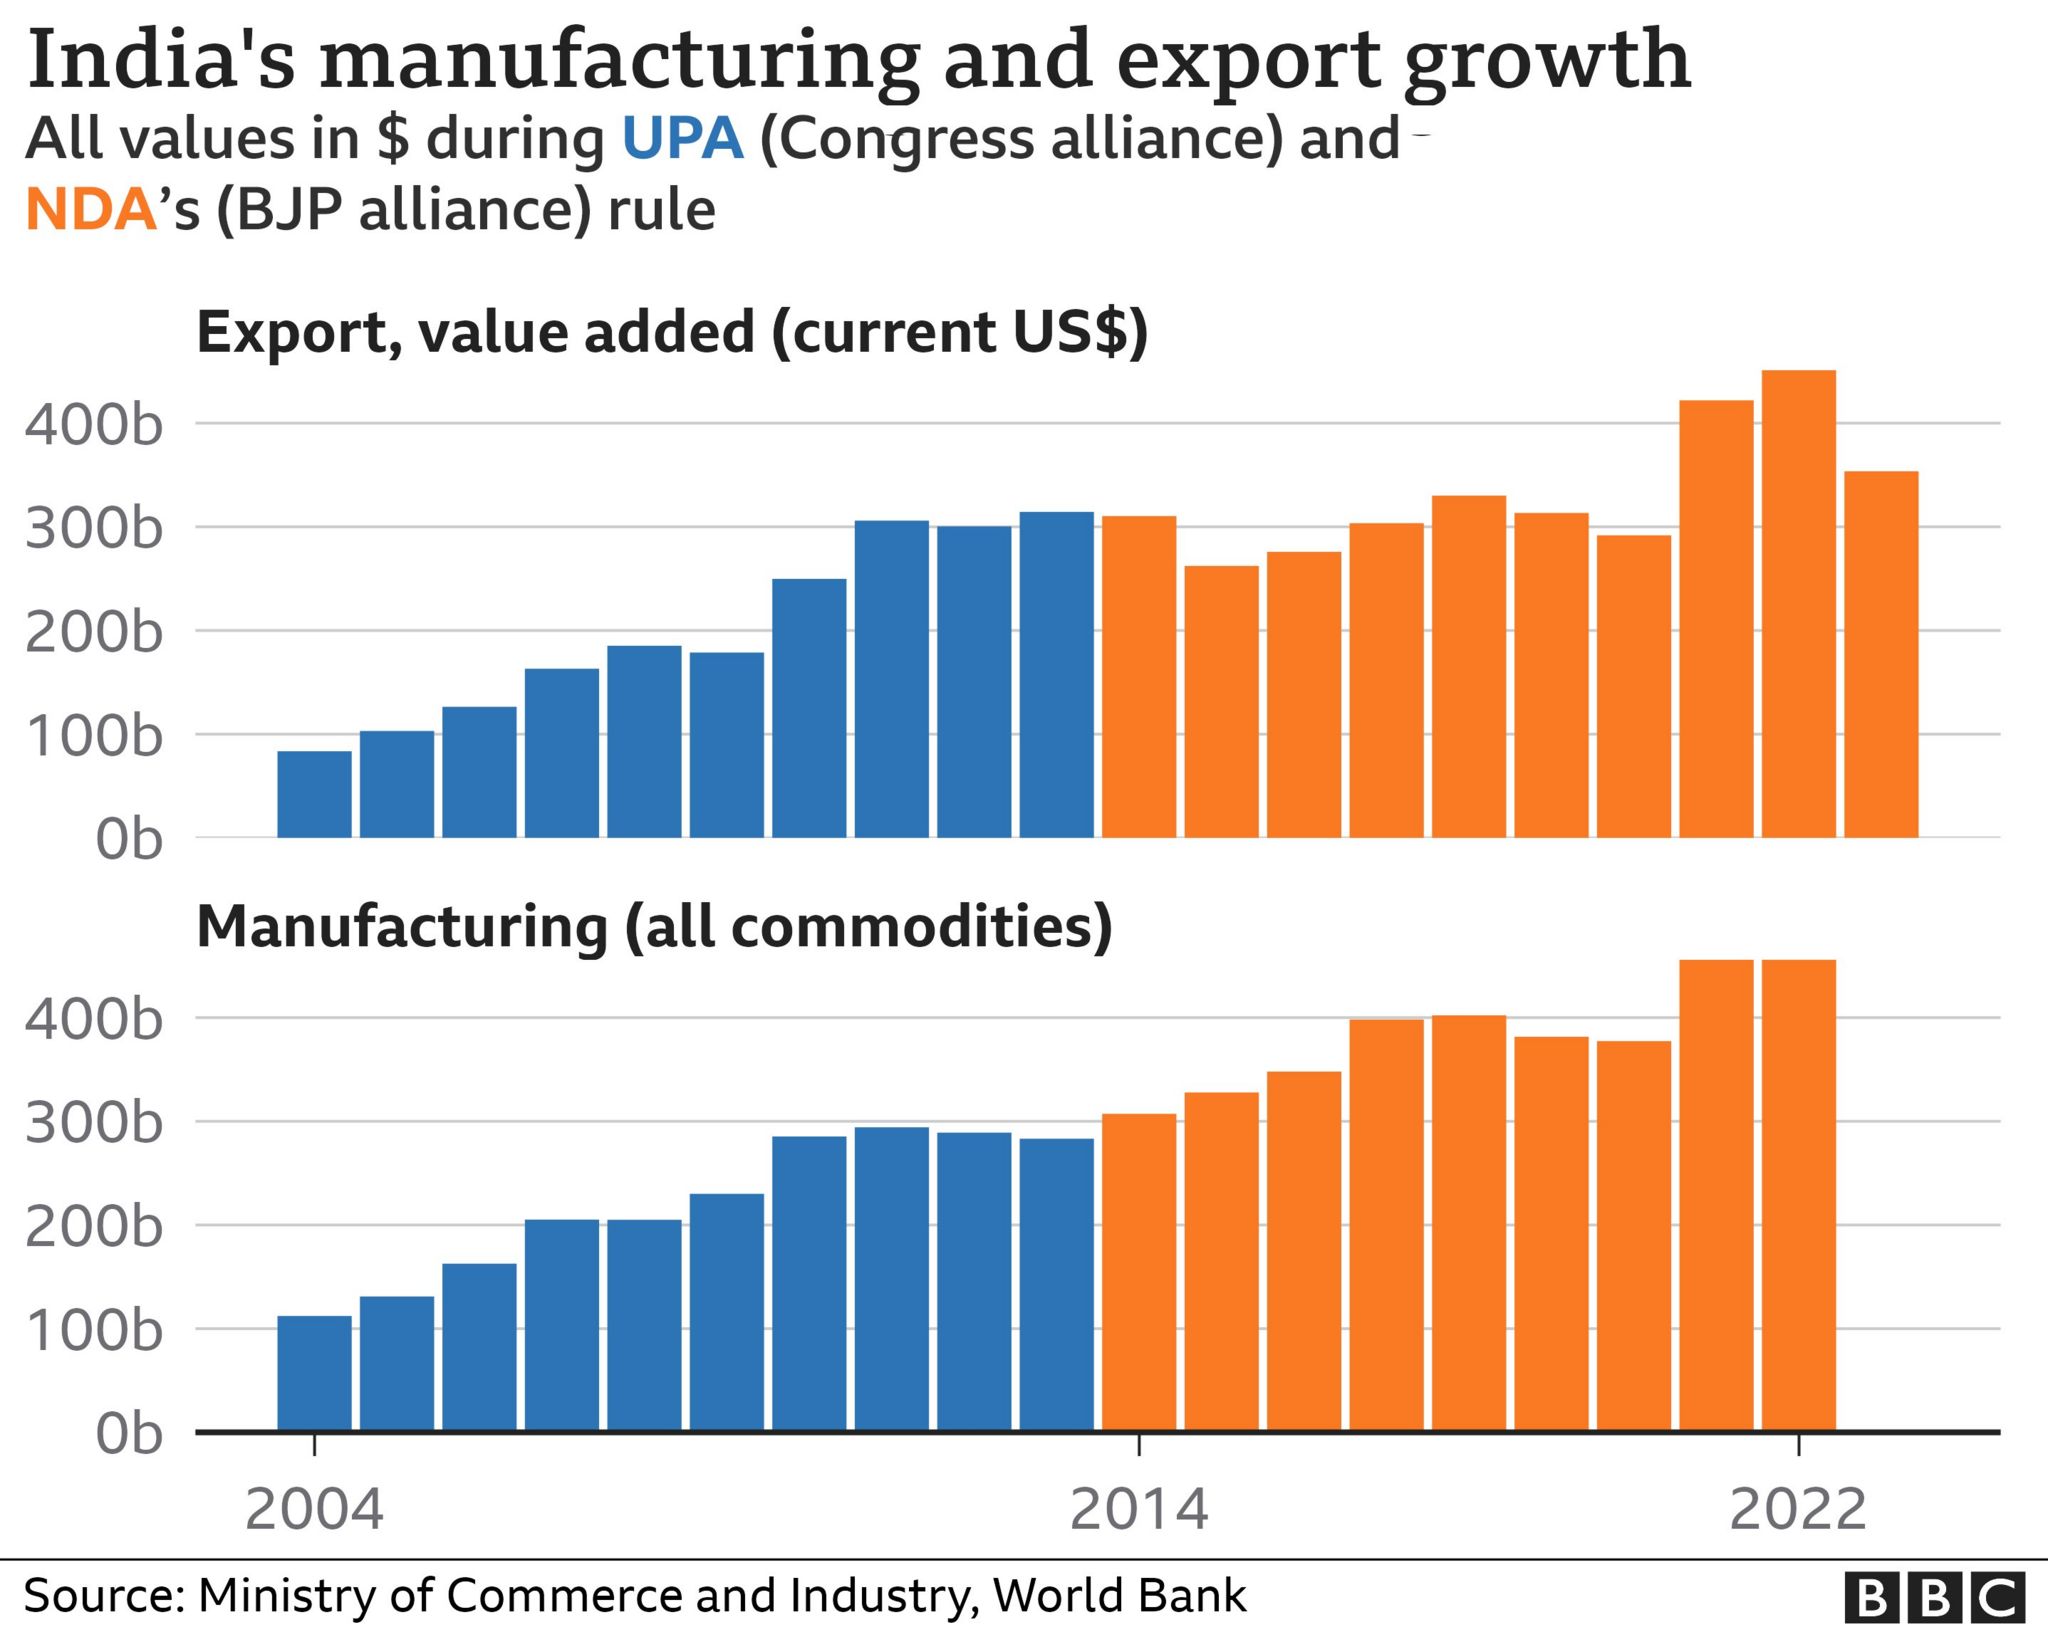 India's manufacturing and export growth under NDA and UPA